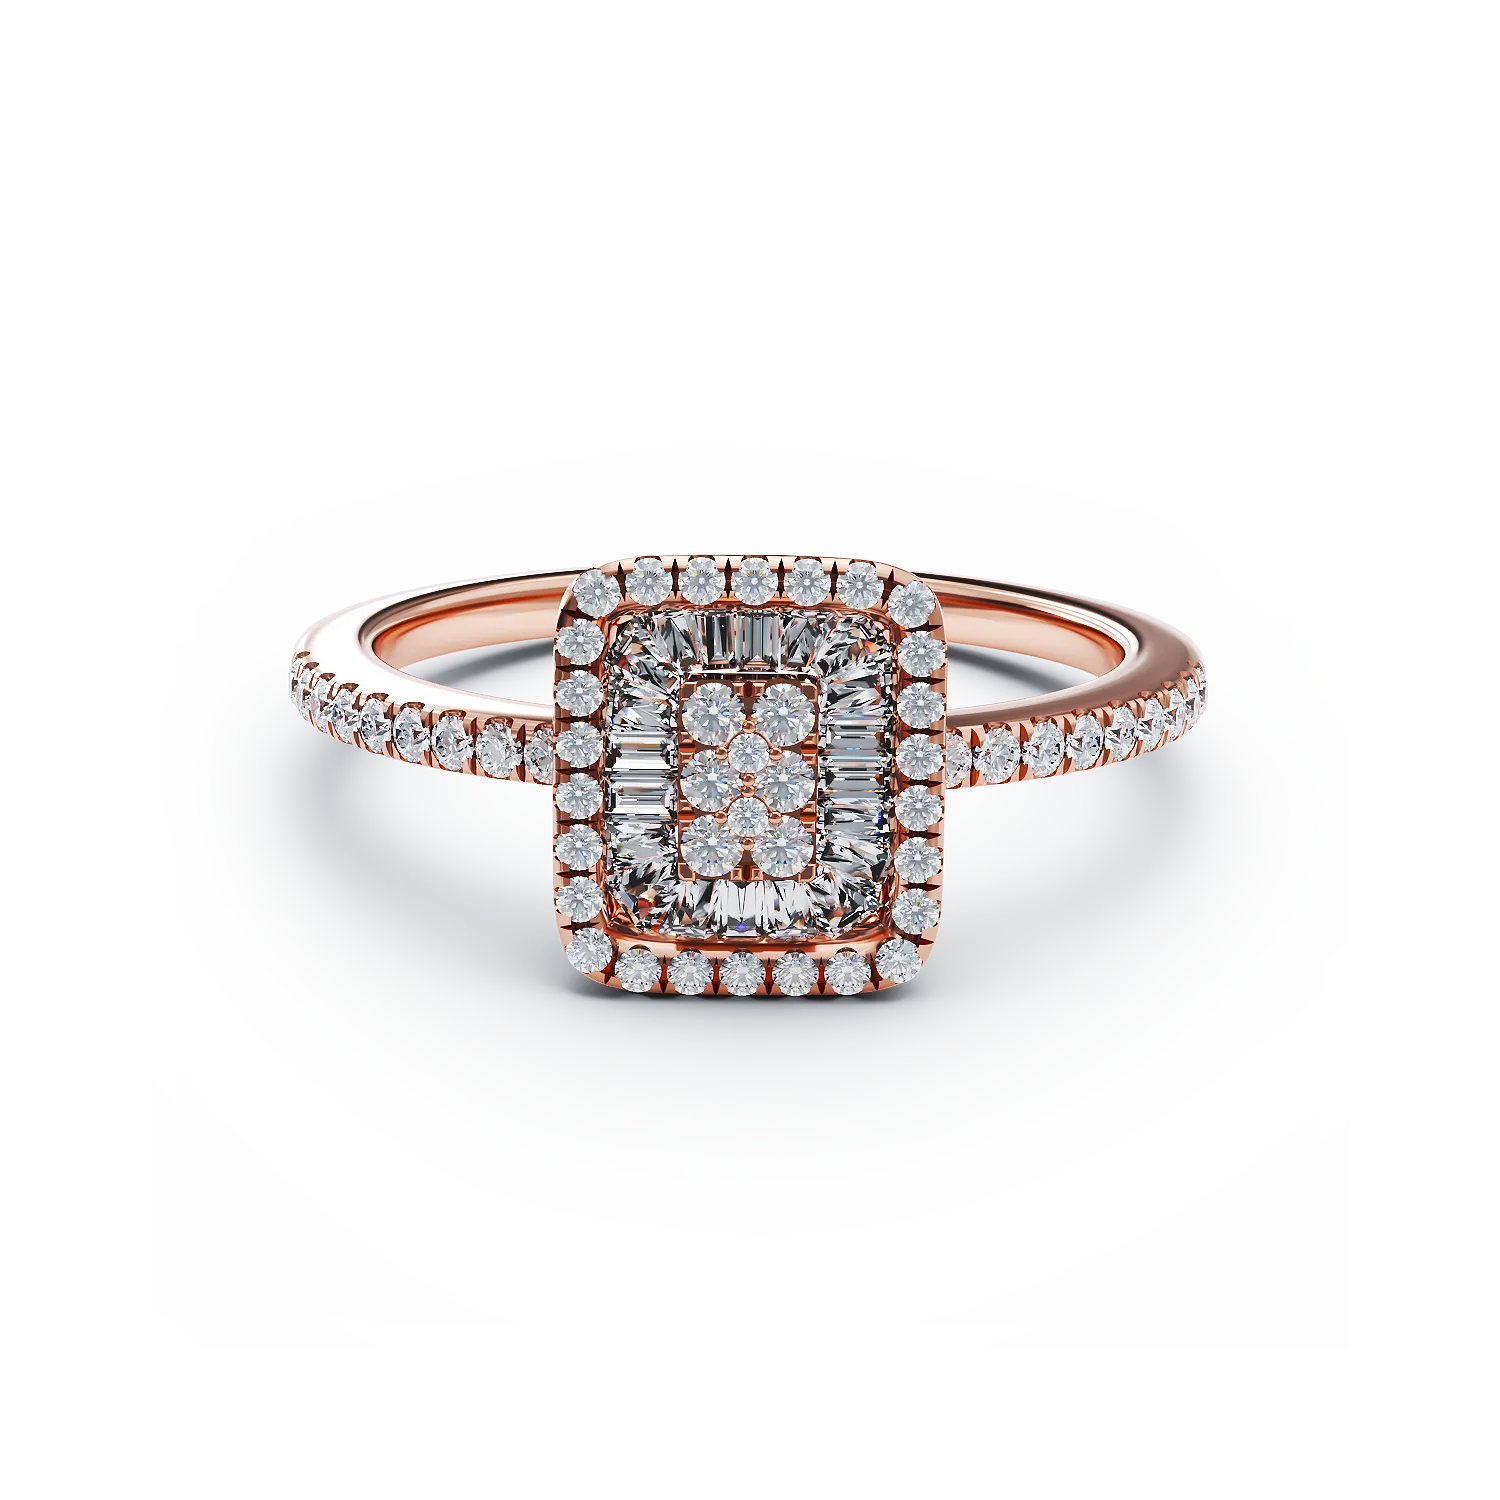 18K rose gold engagement ring with 0.3ct diamonds